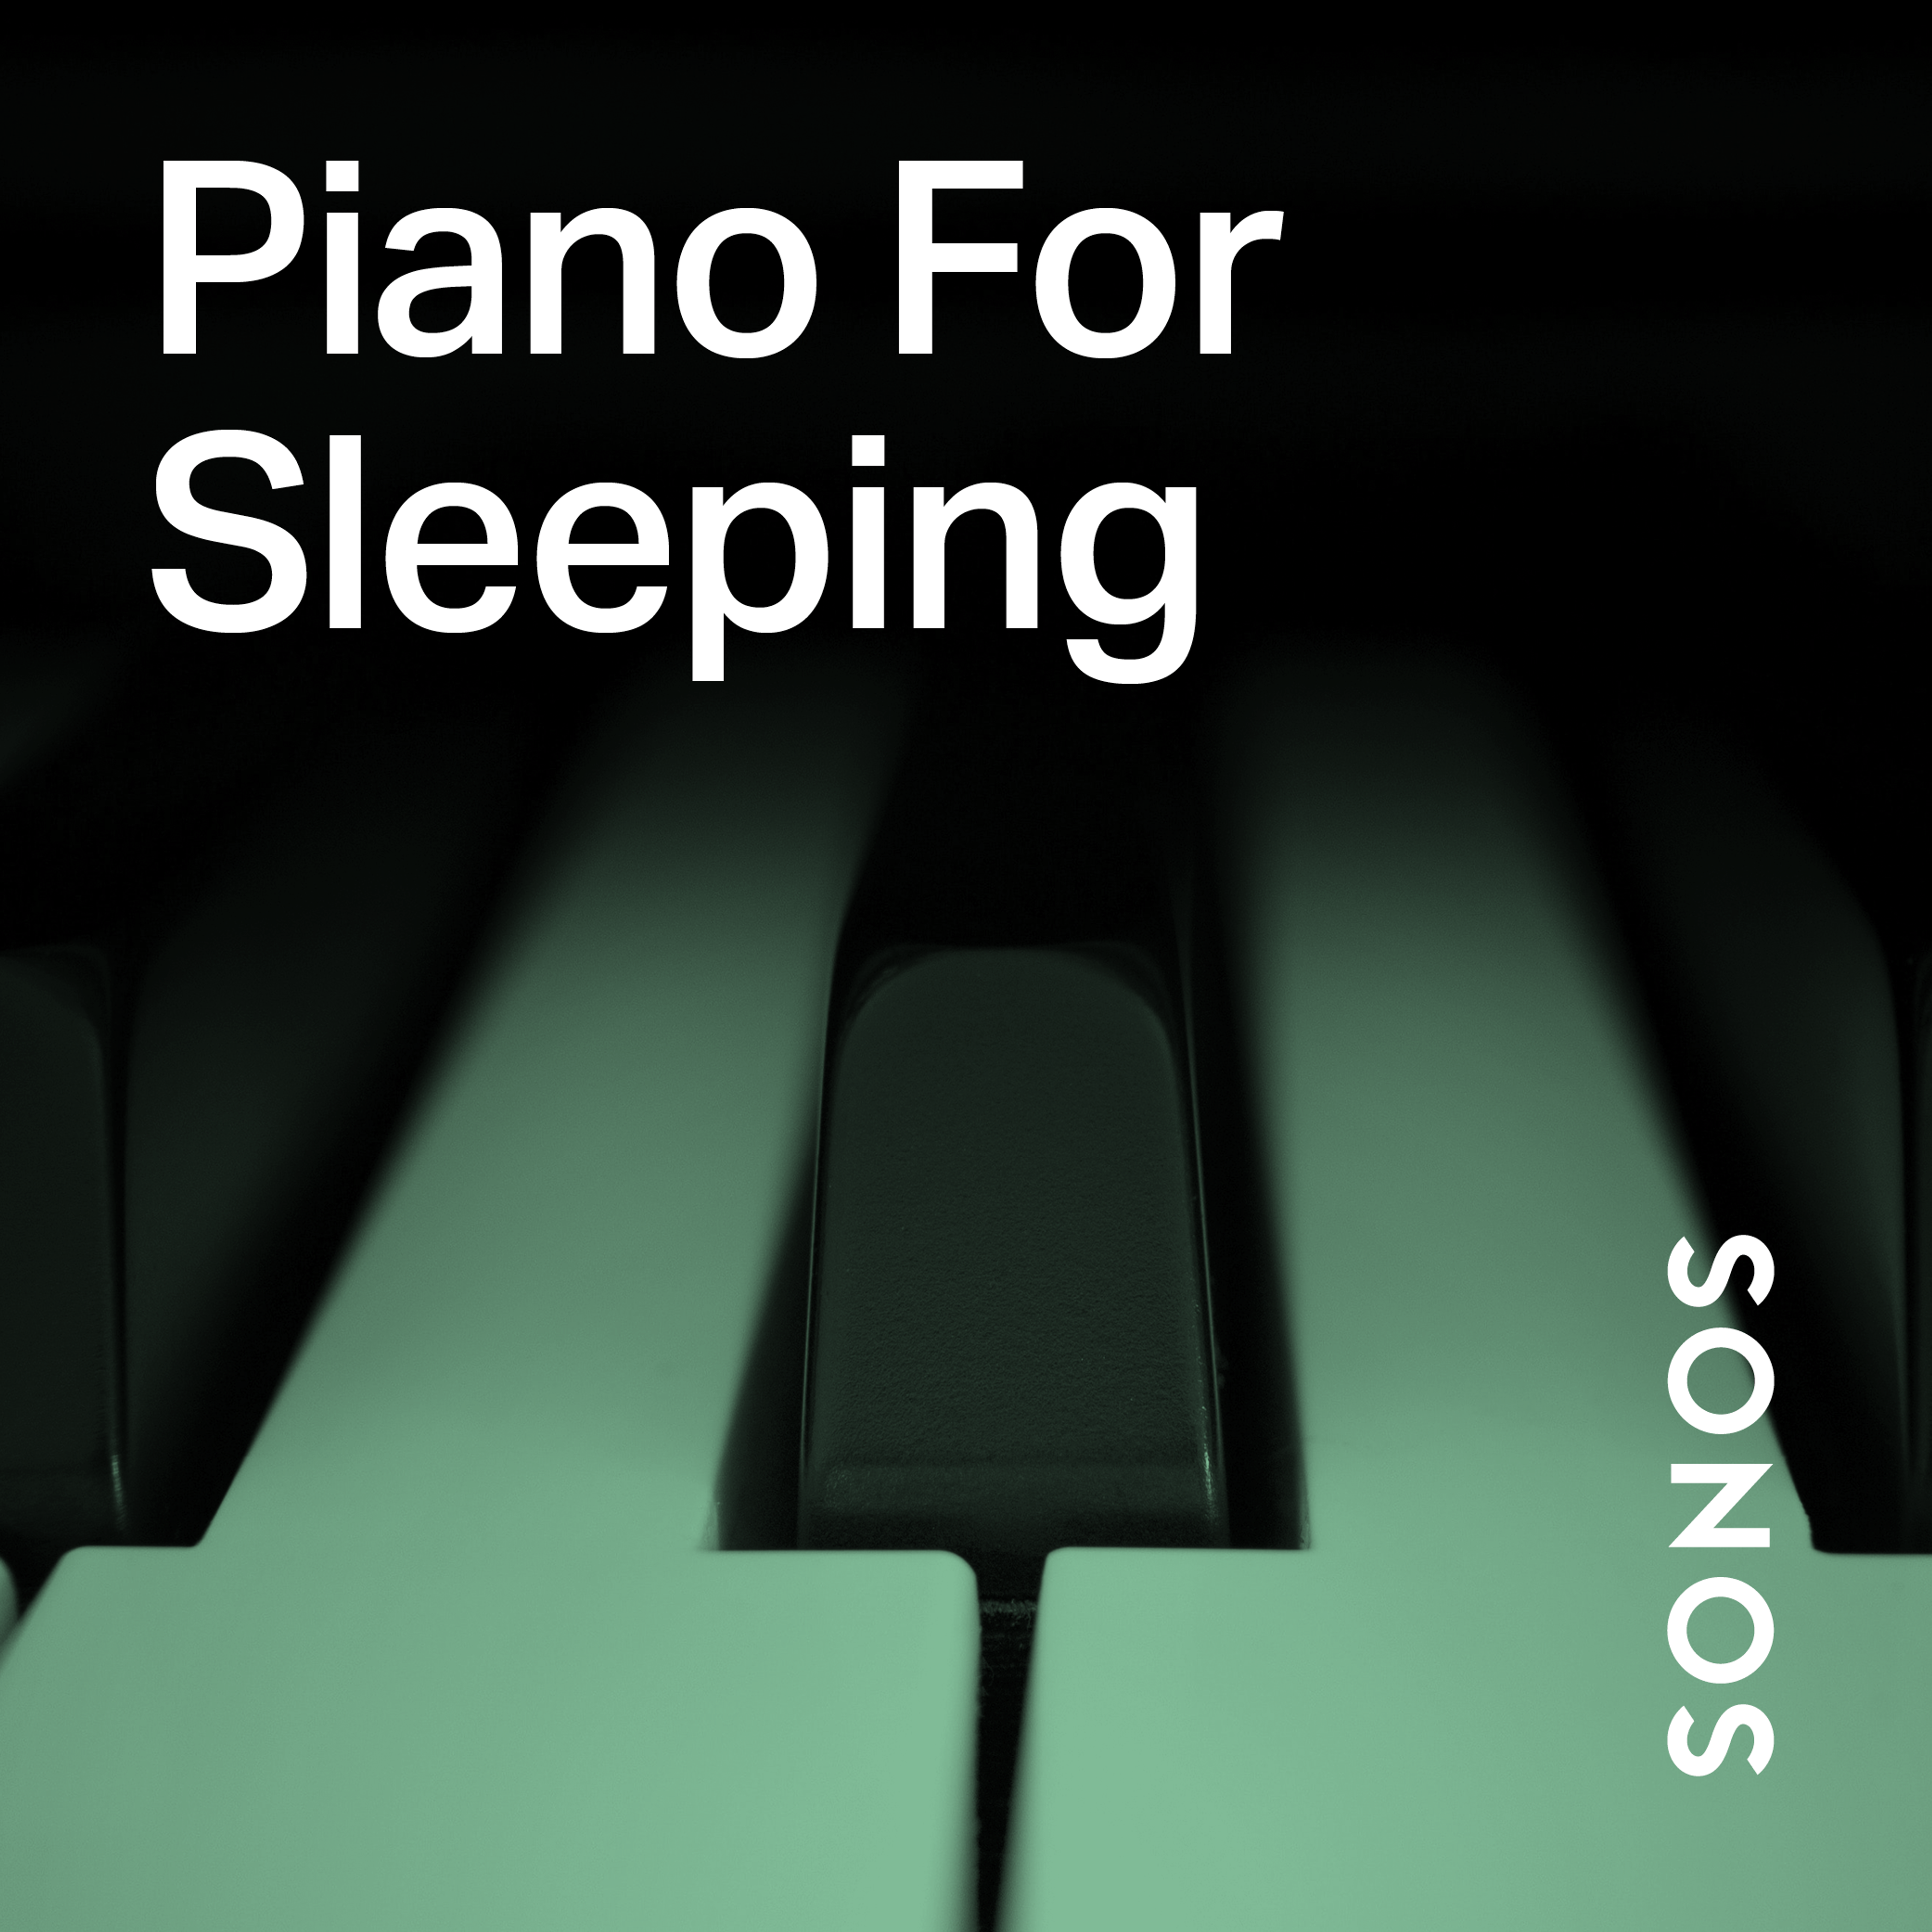 Piano for Sleeping radio station cover